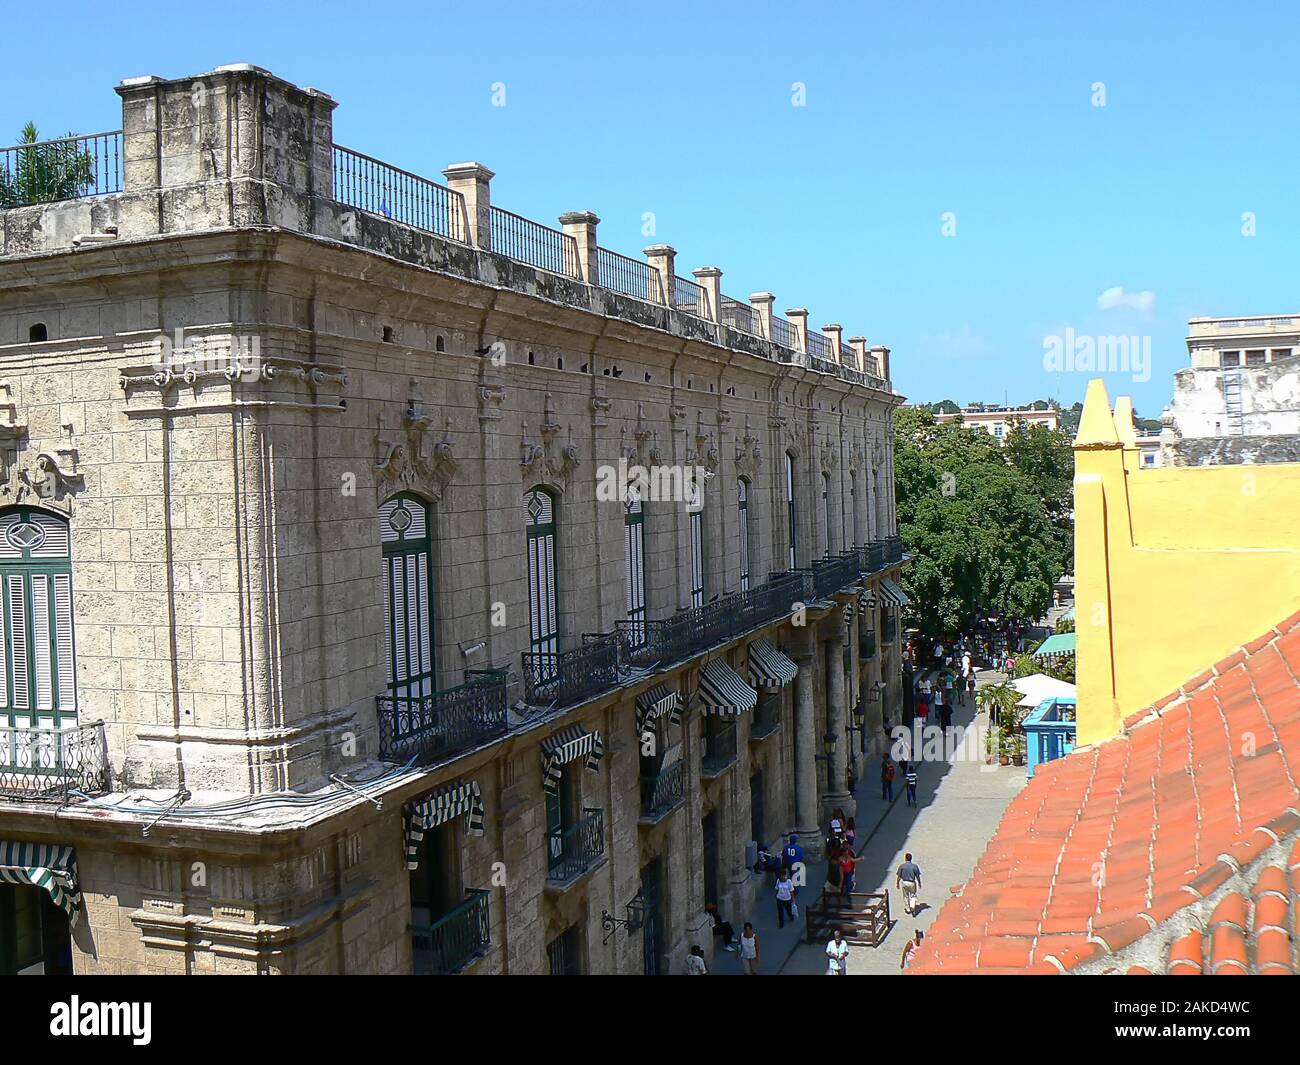 The Palacio de los Capitanes Generales in Old Havana, Cuba is the former residence of the governors. Stock Photo